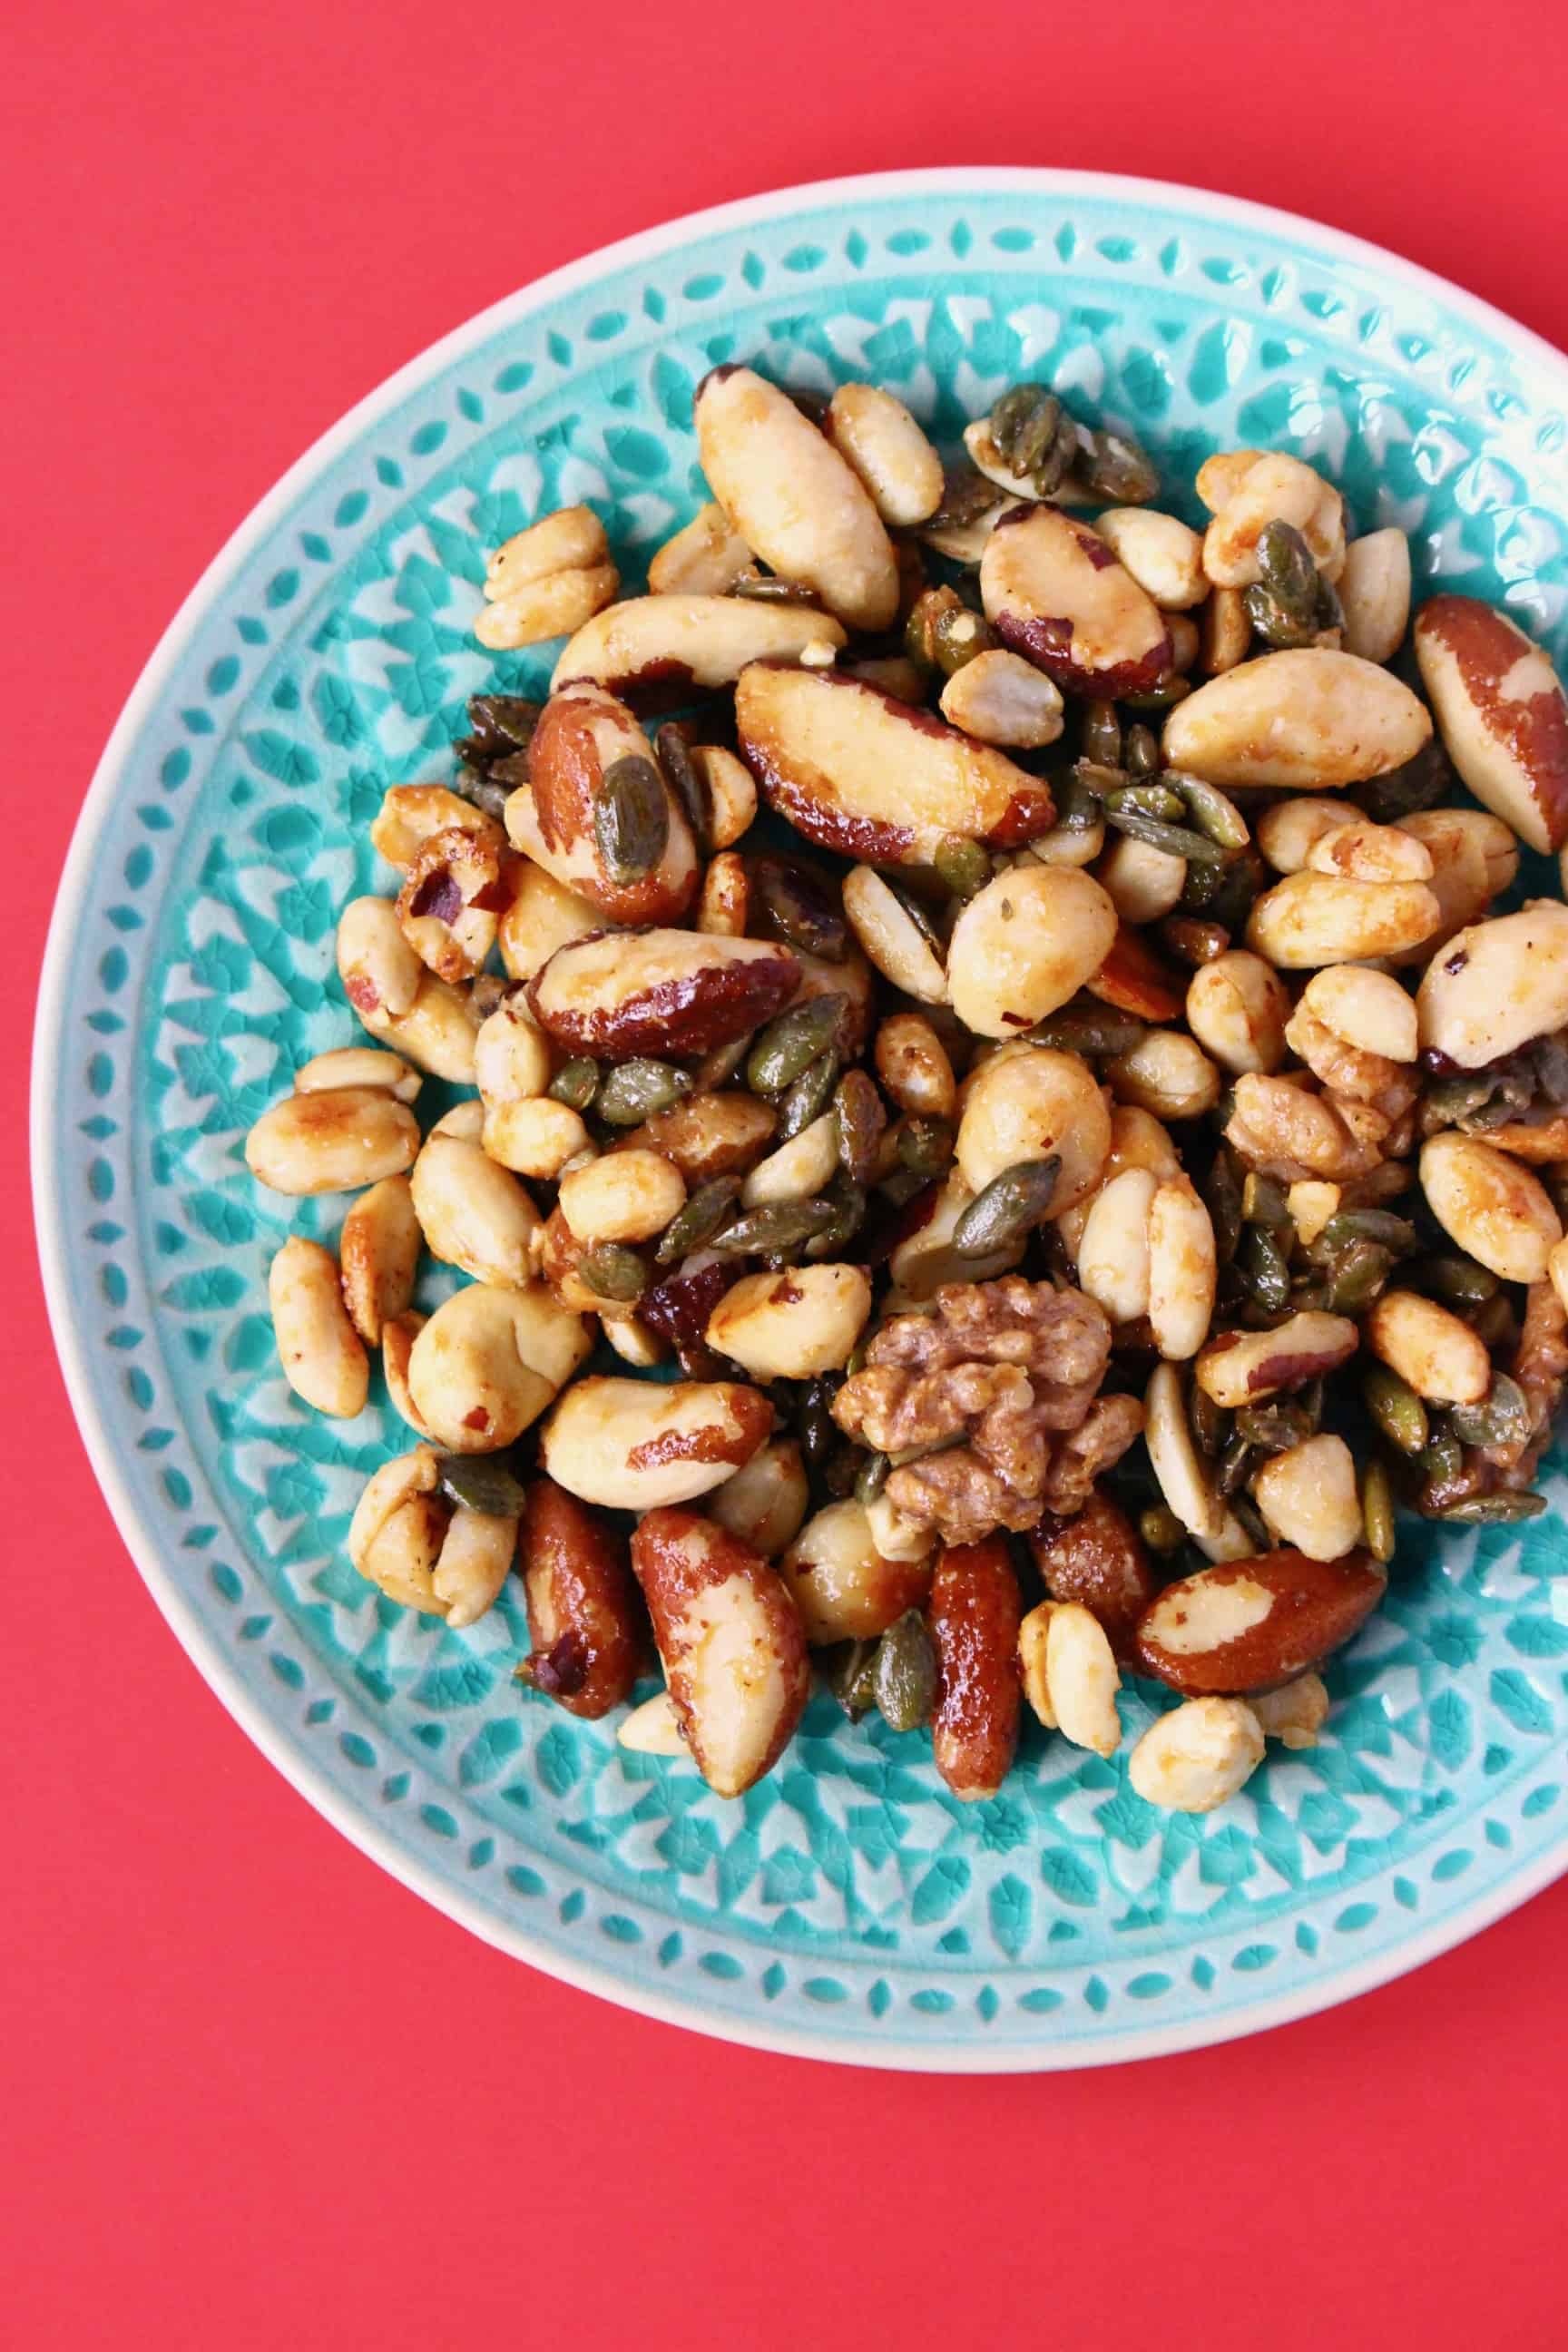 A pile of brown caramelised nuts on a green plate against a red background